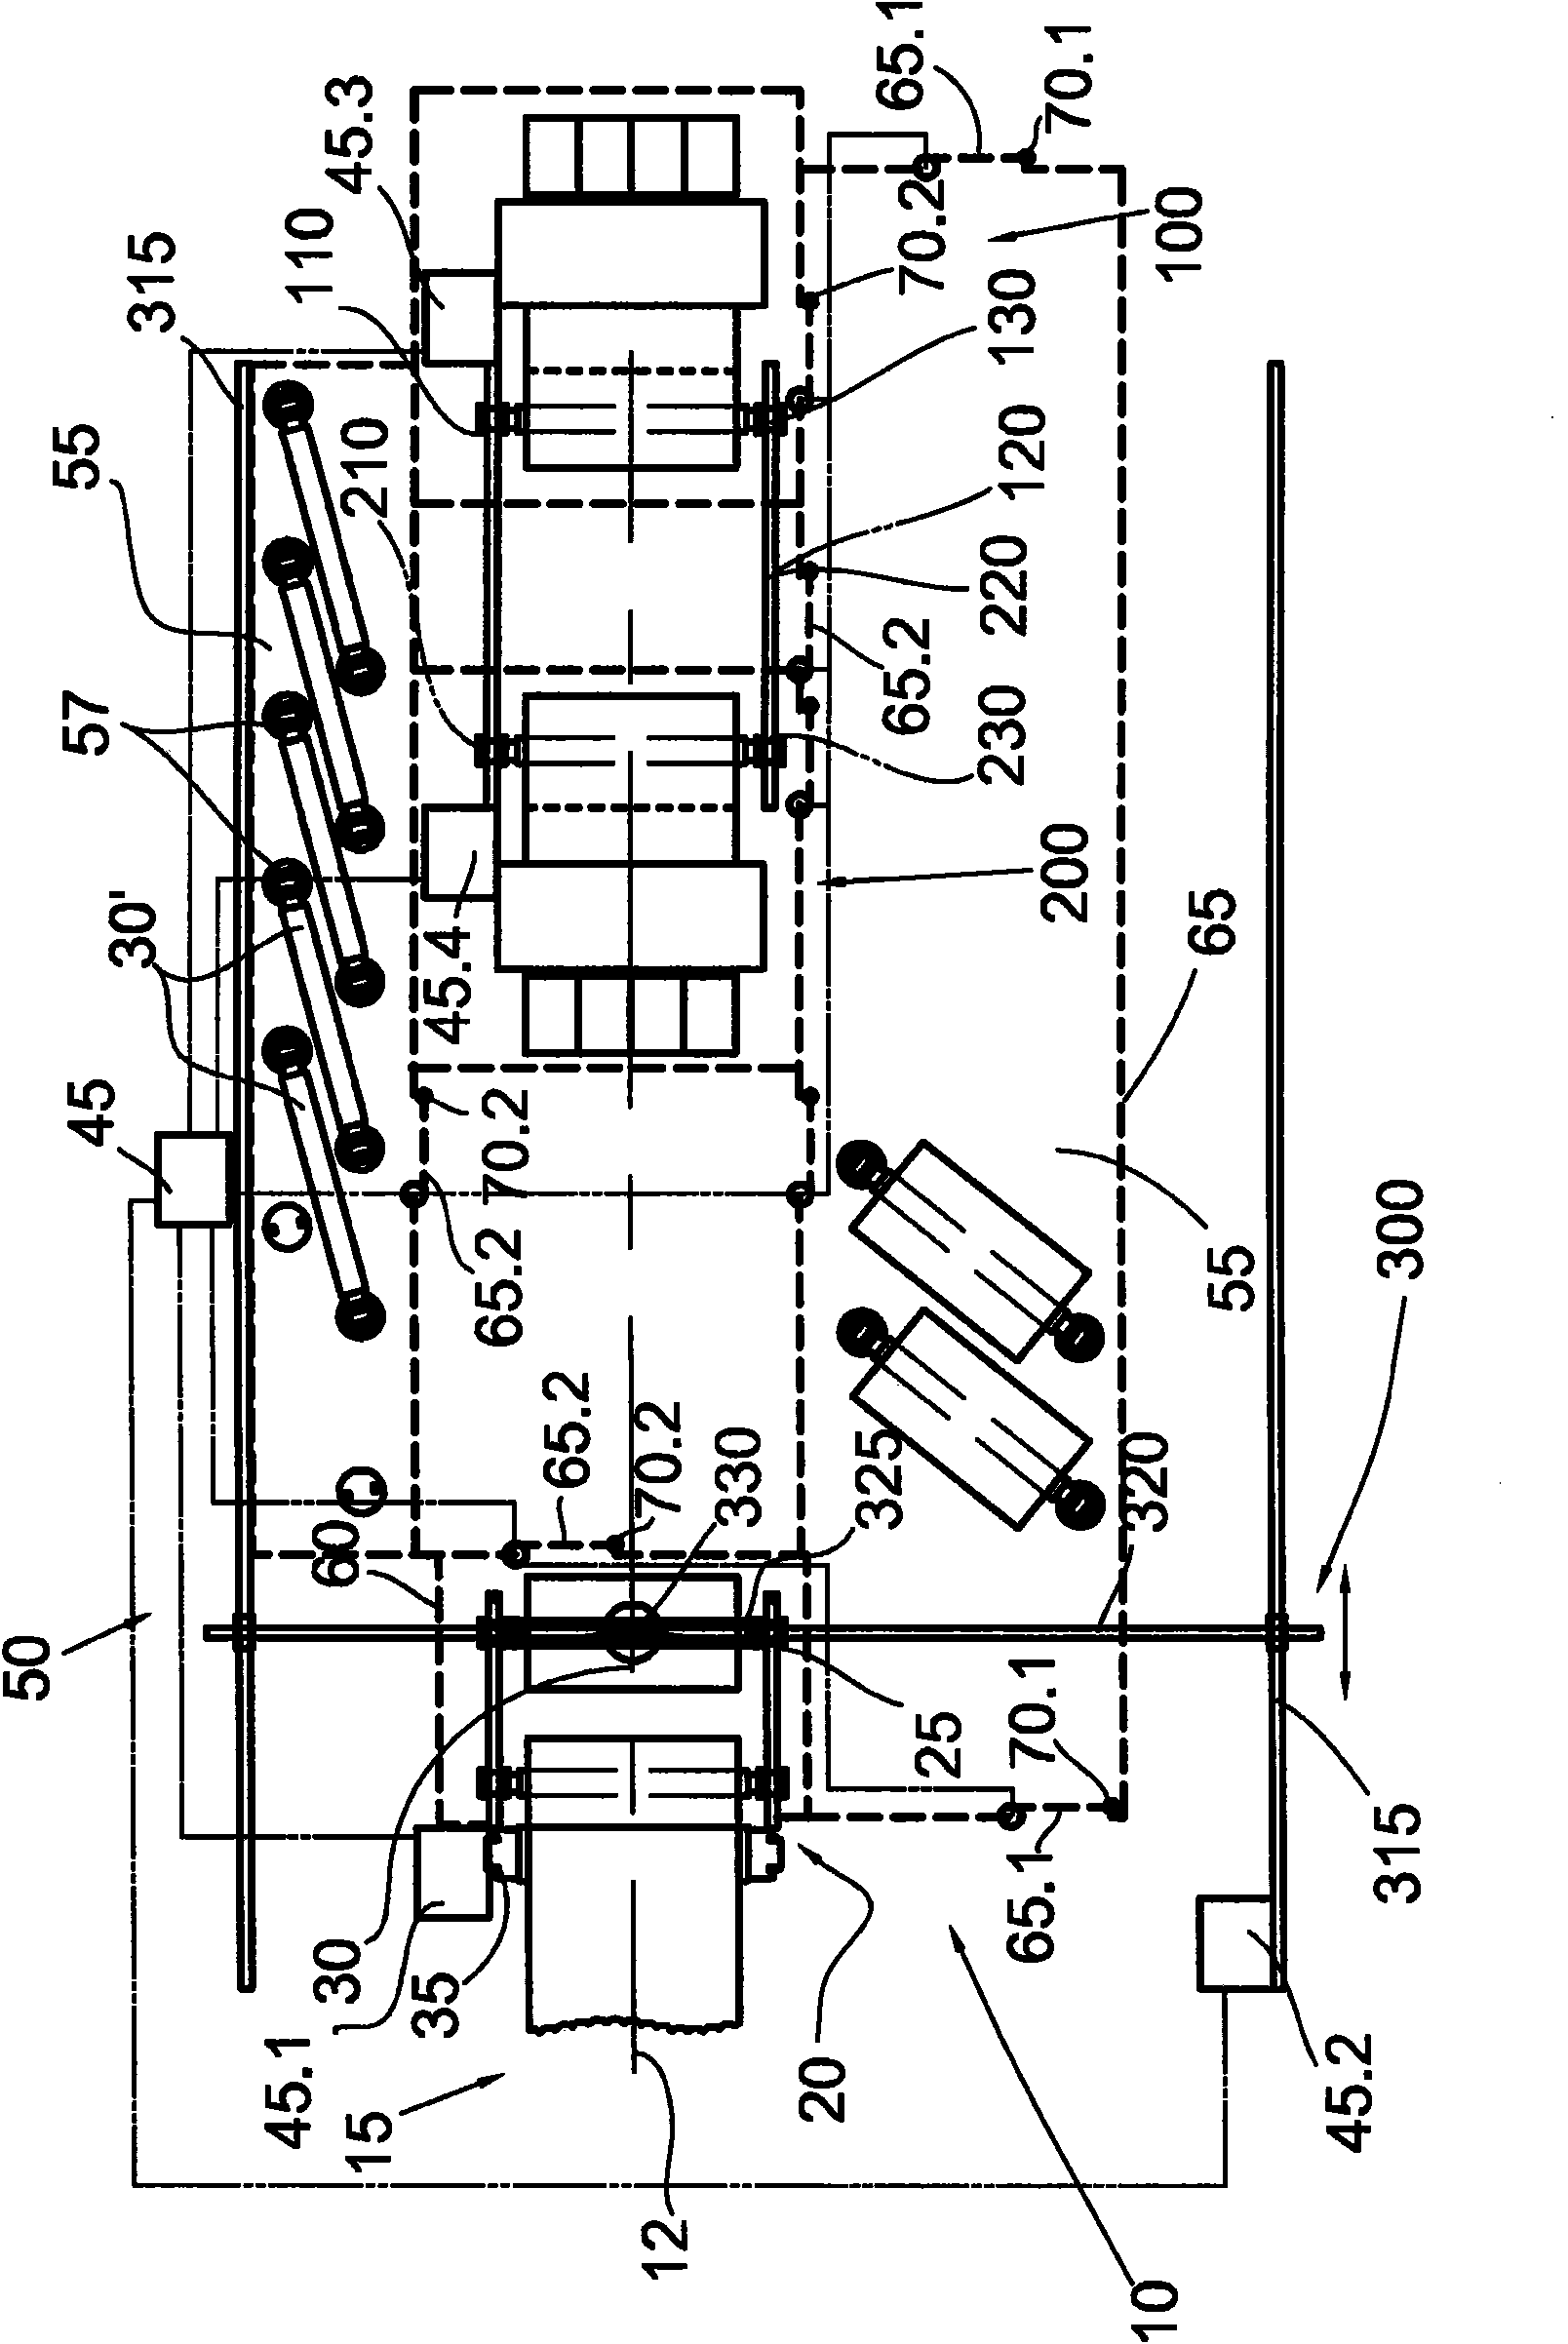 Fiber web handling and/or production line and method in connection with fiber web handling and/or production line